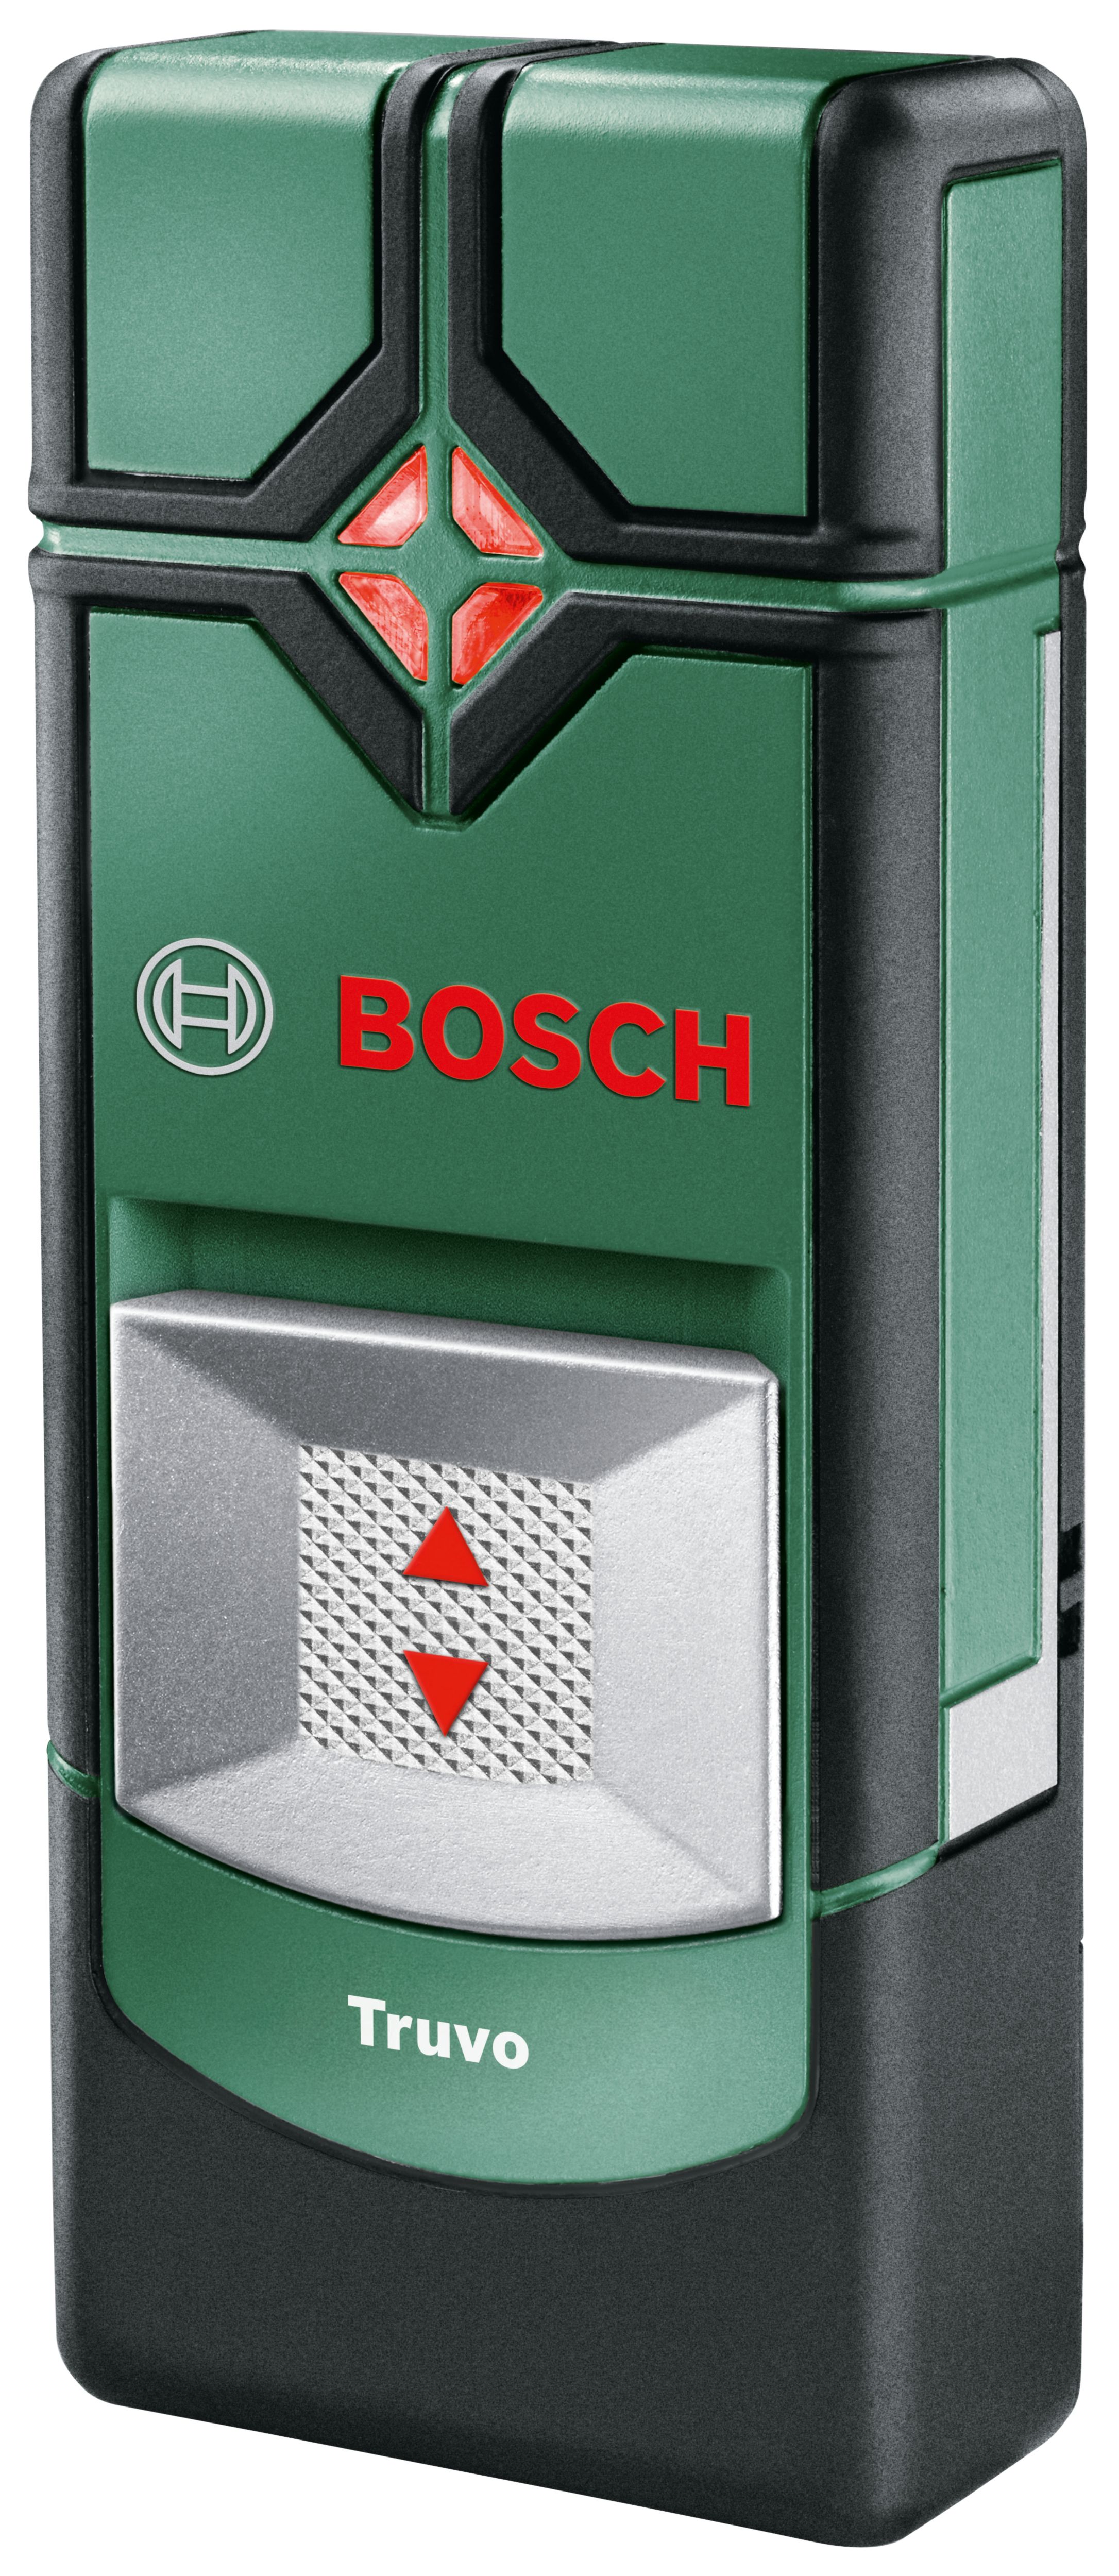 Bosch Truvo LED Cable & Pipe Digital Detector